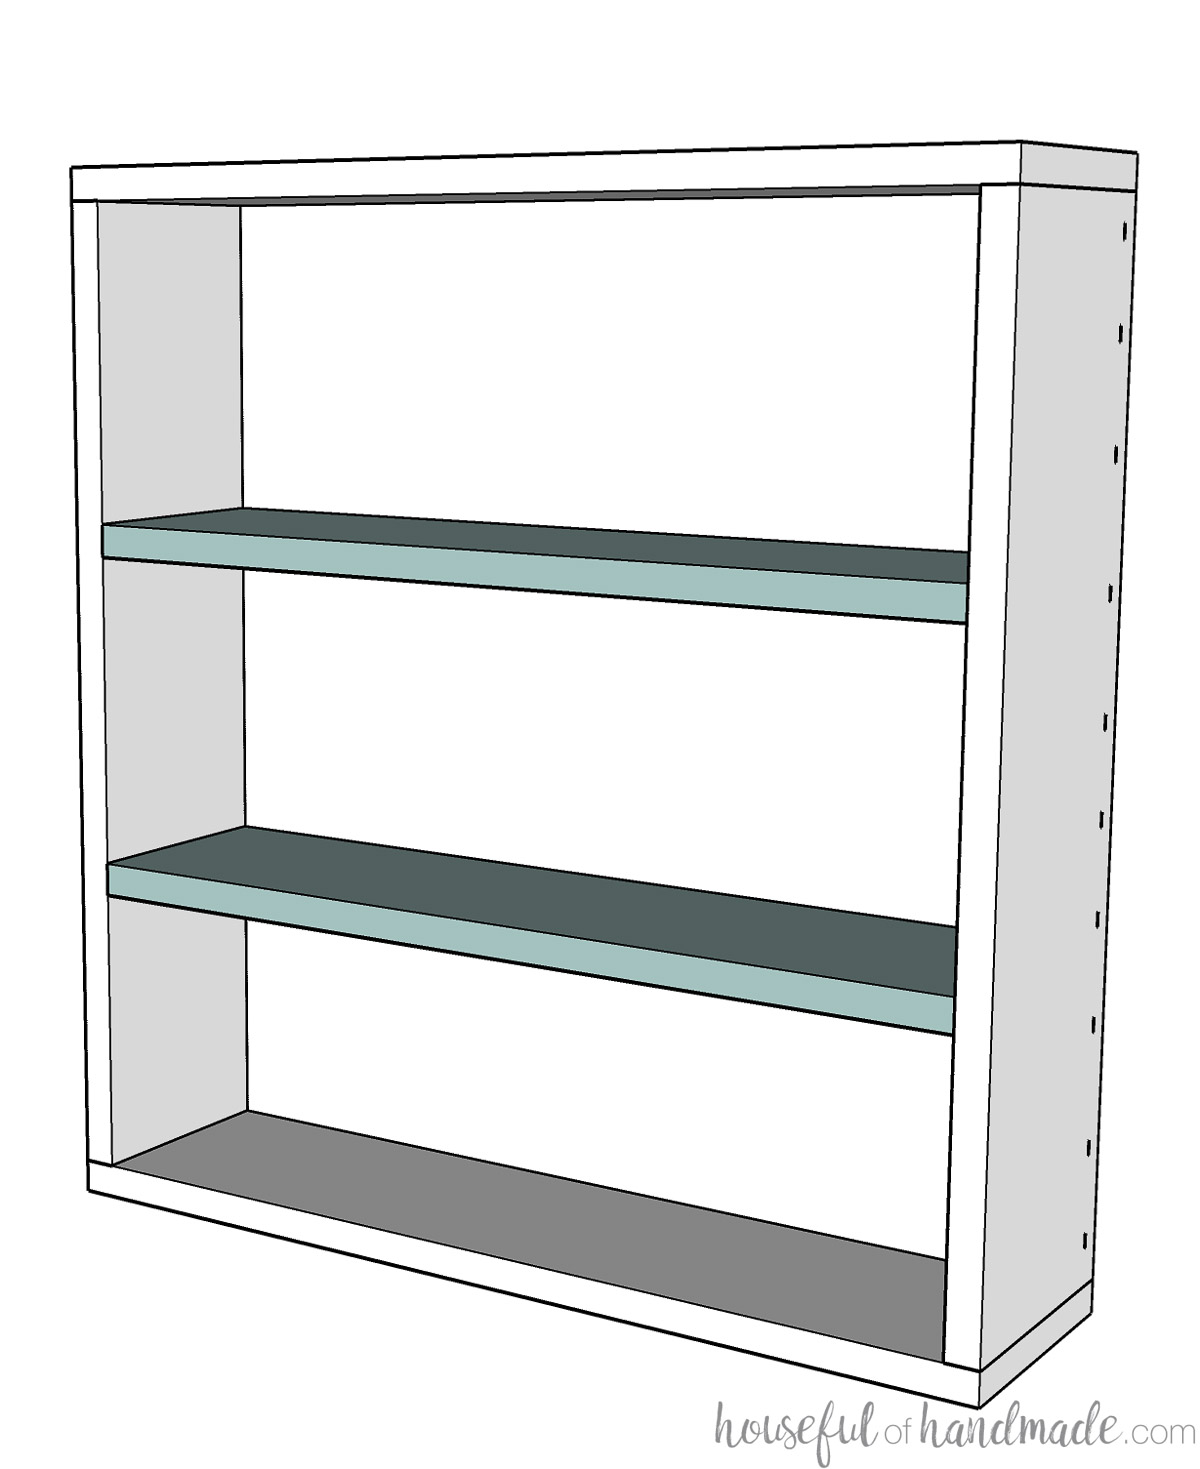 Drawing of shelves added to the spice rack. 